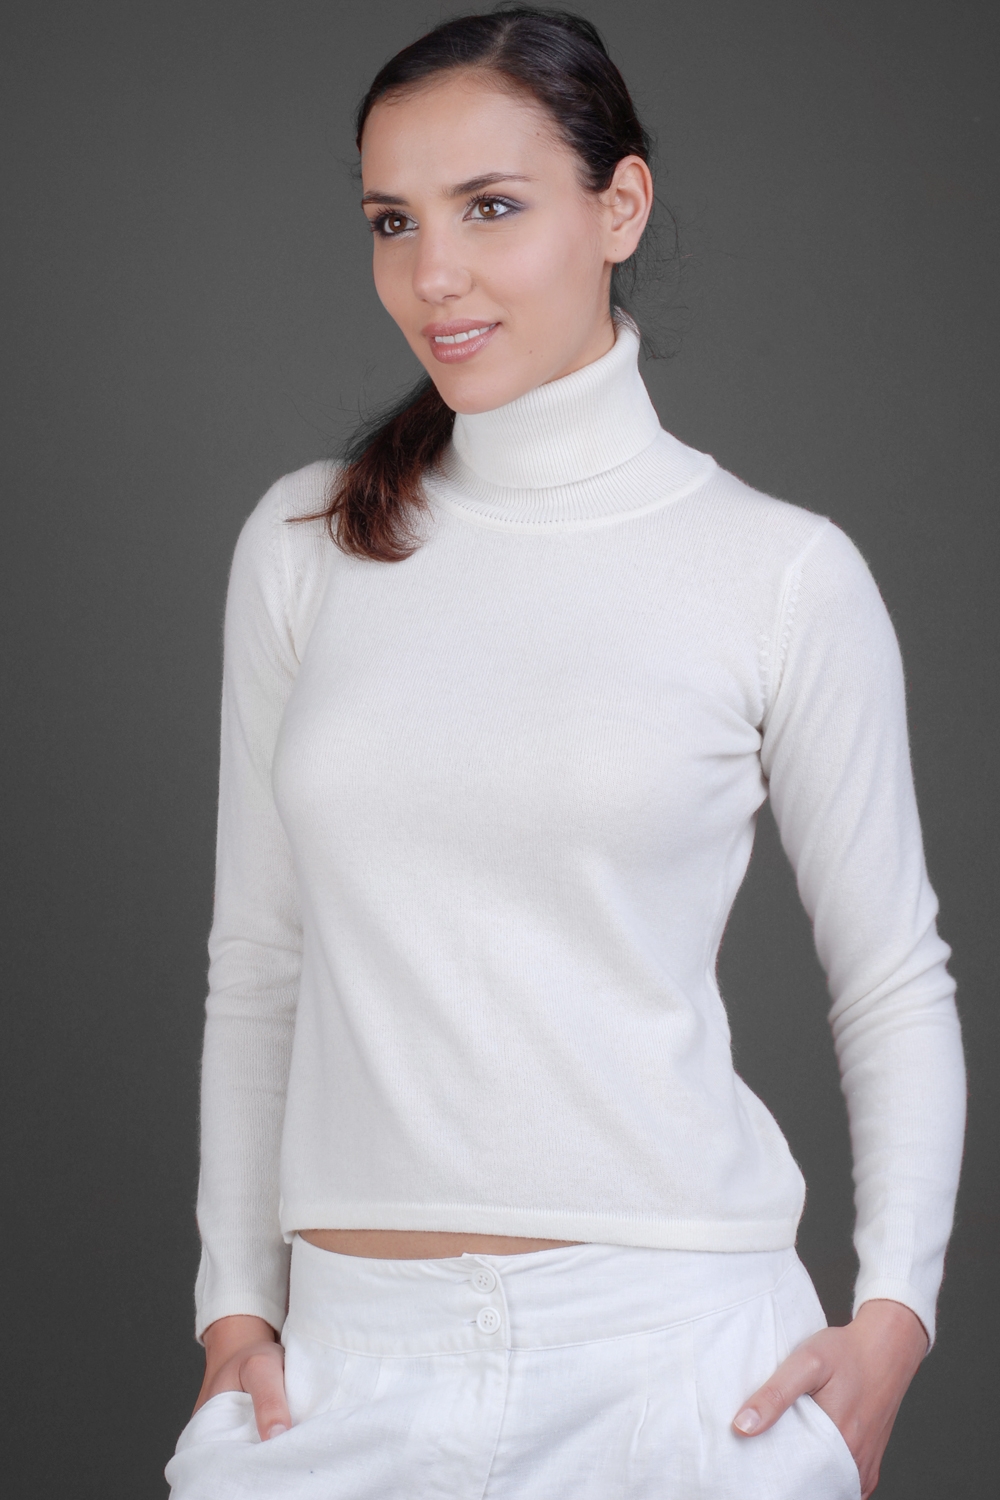 Cashmere ladies timeless classics jade off white s